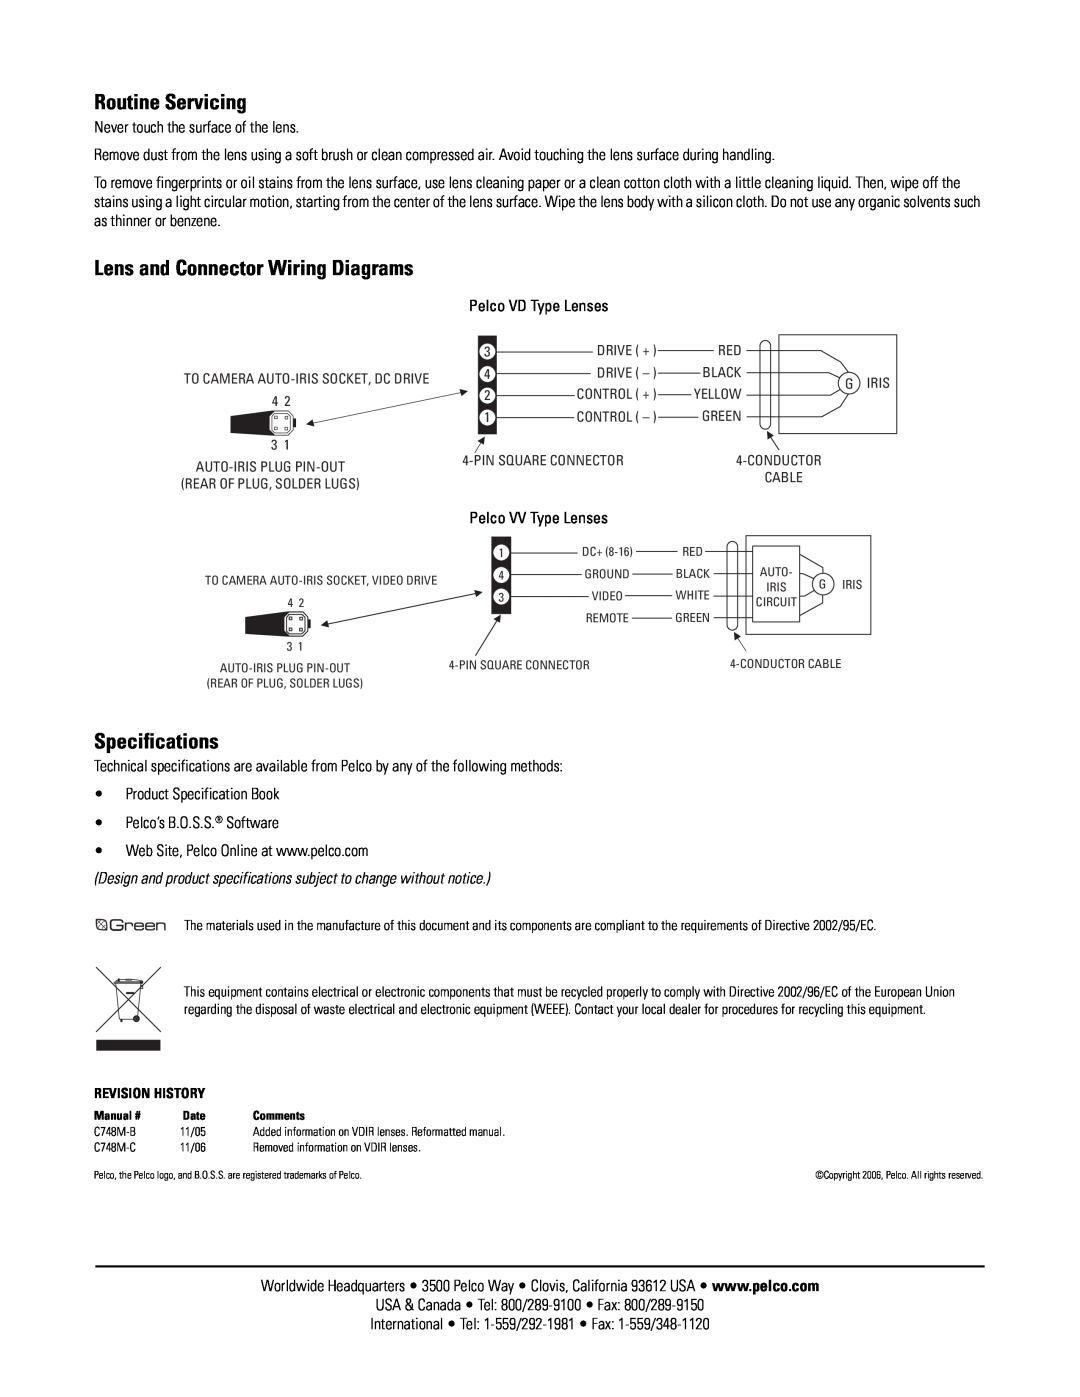 Pelco 13VA5-40, 13VD3.5-8, 13VD5-40, 13VA5.5-82.5 Routine Servicing, Lens and Connector Wiring Diagrams, Specifications 